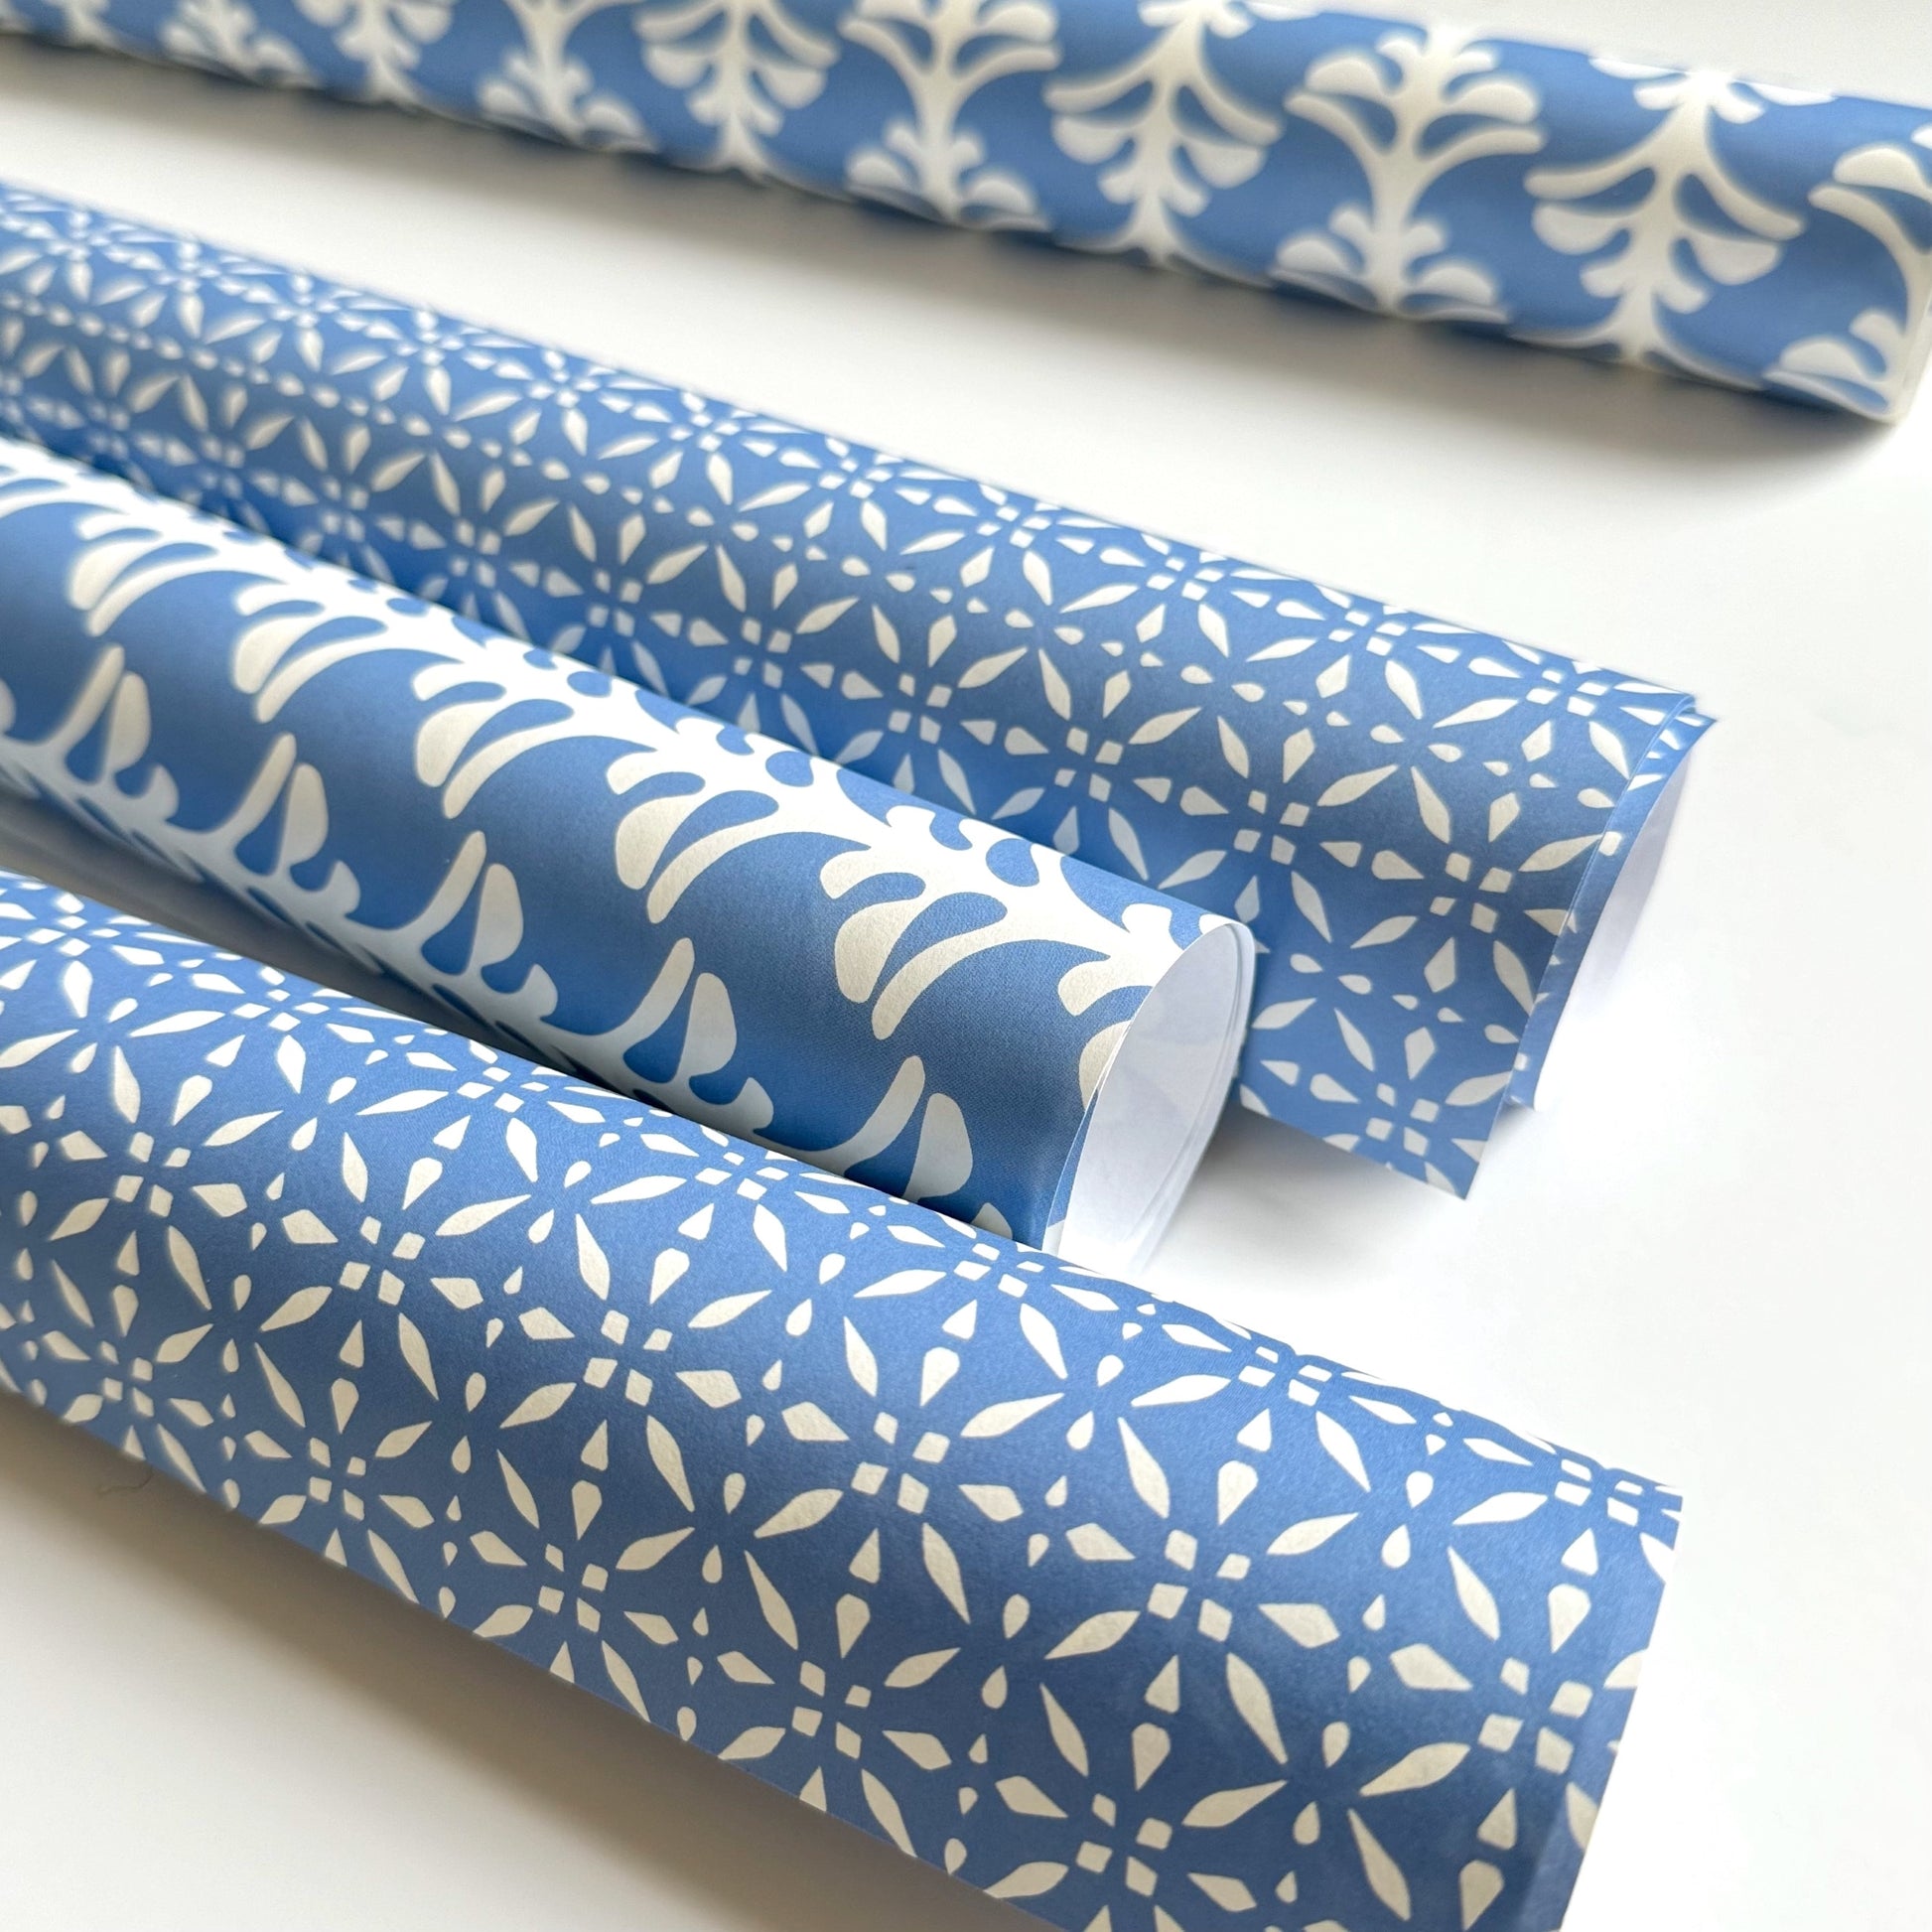 wrapping paper by Otto Editions with a cut-out design in white on a sky blue background. Pictured rolled alongside other designs